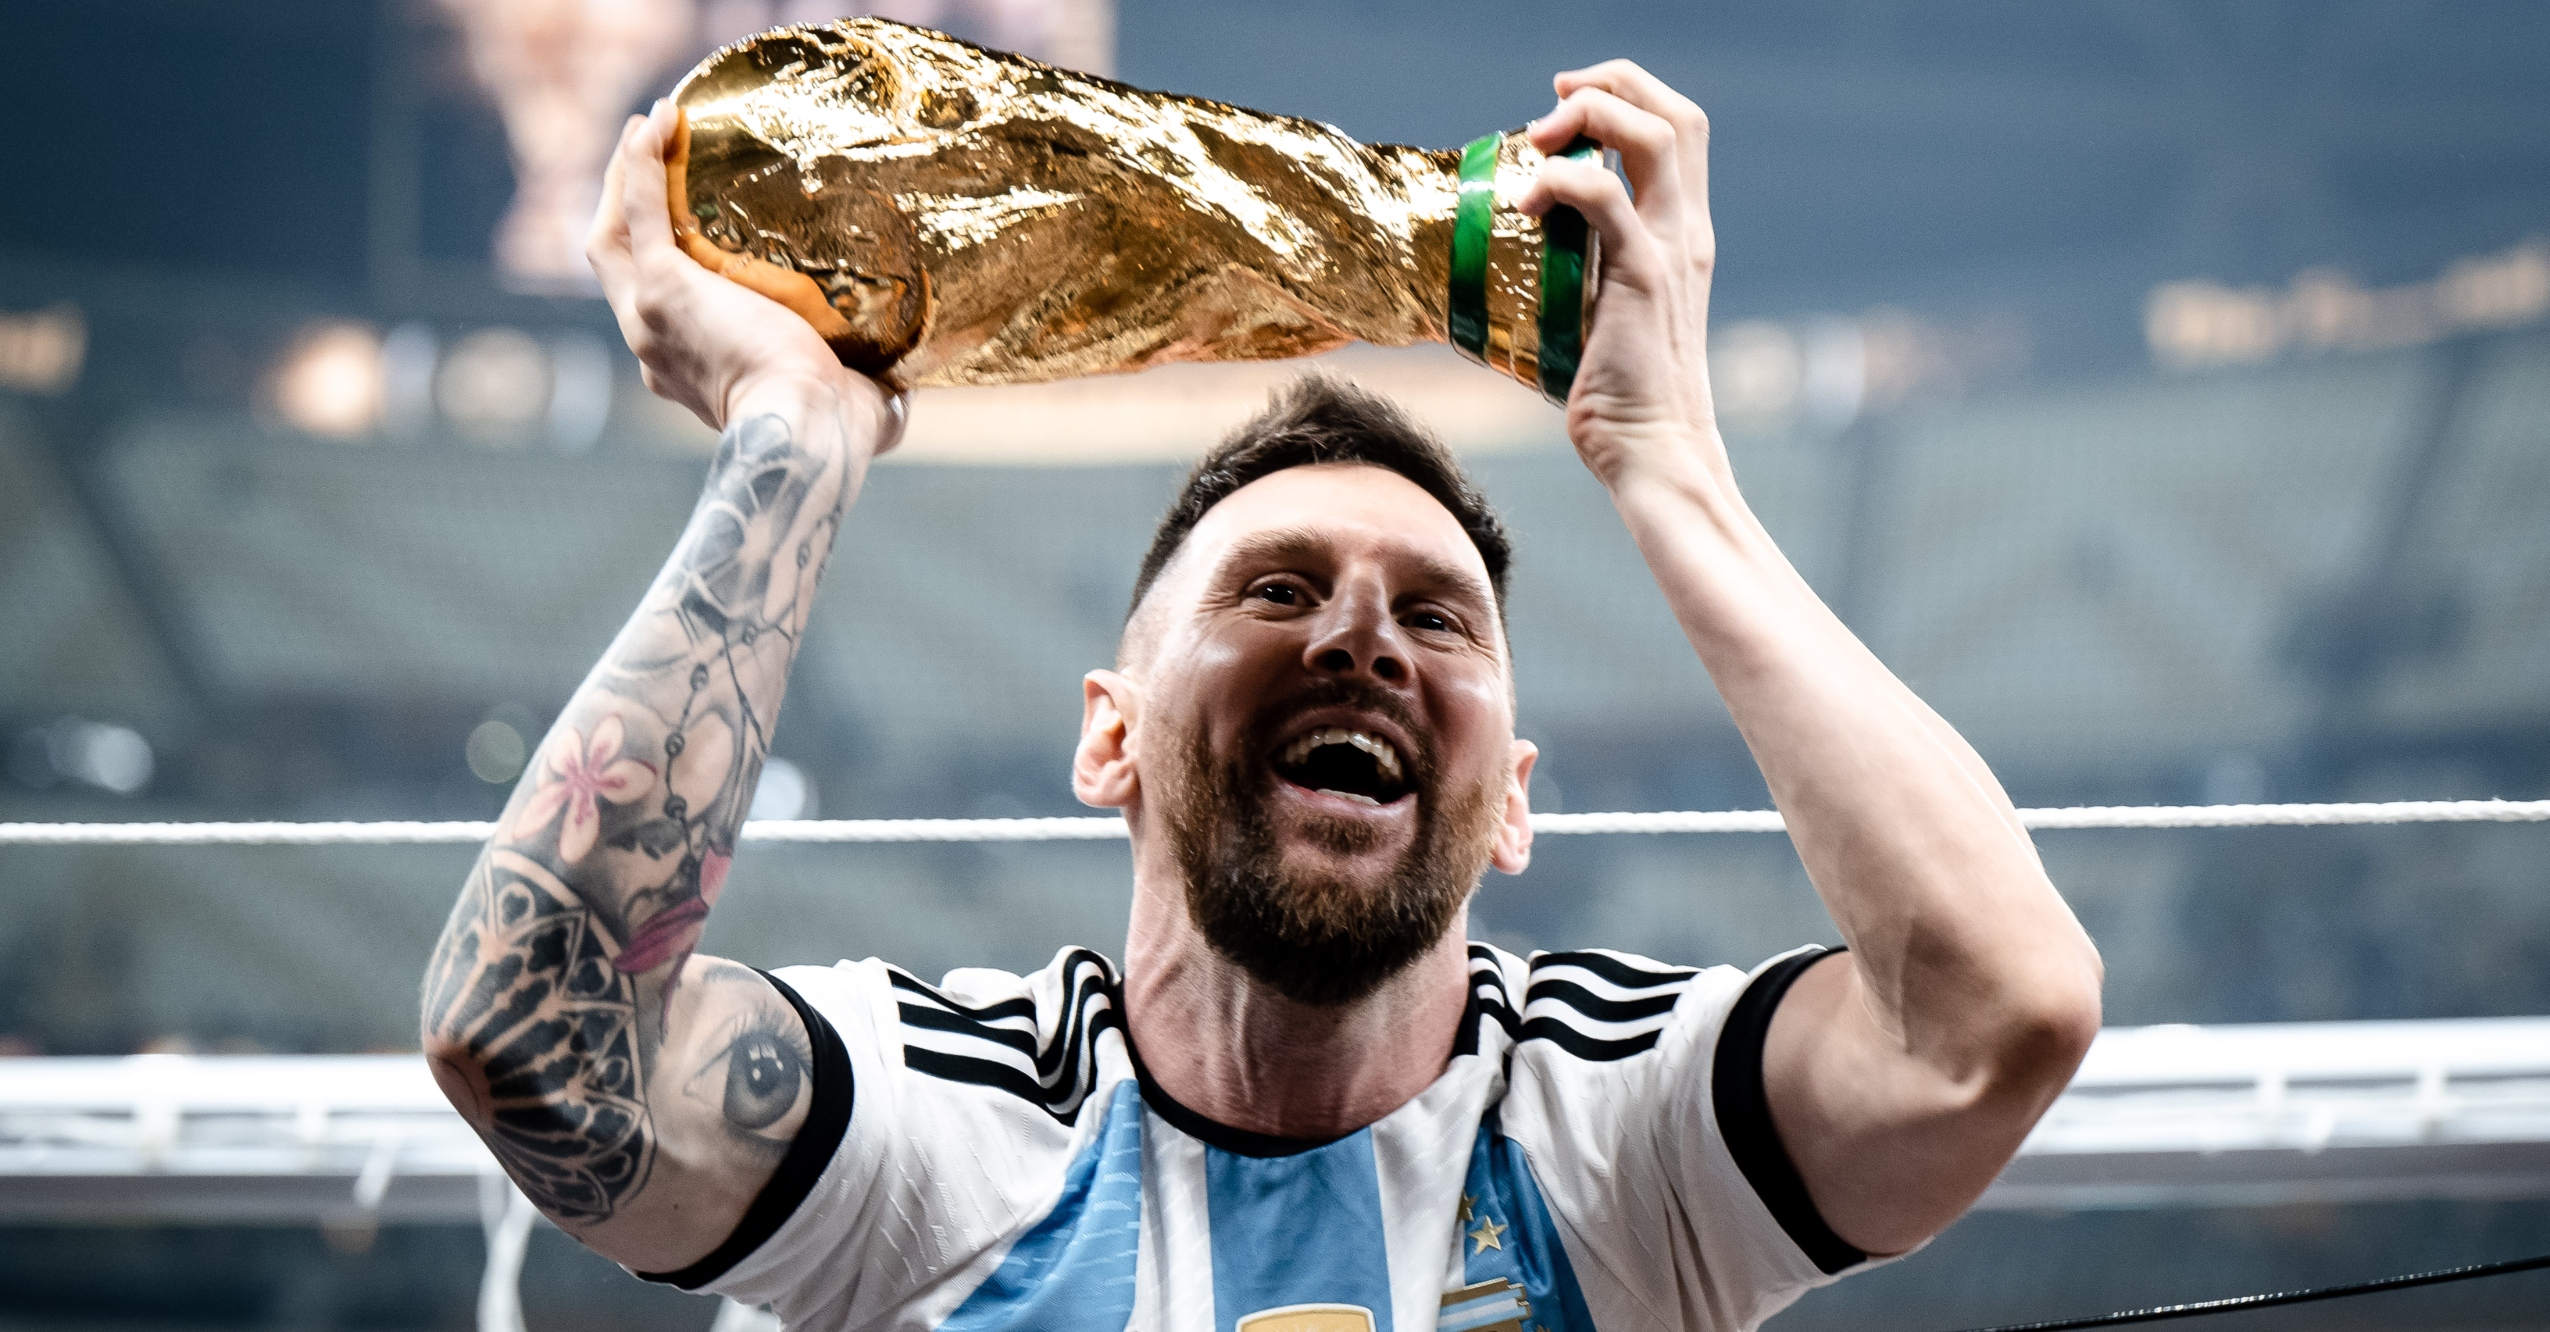 Lionel Messi's World Cup-winning Instagram post is 2nd 'most-liked